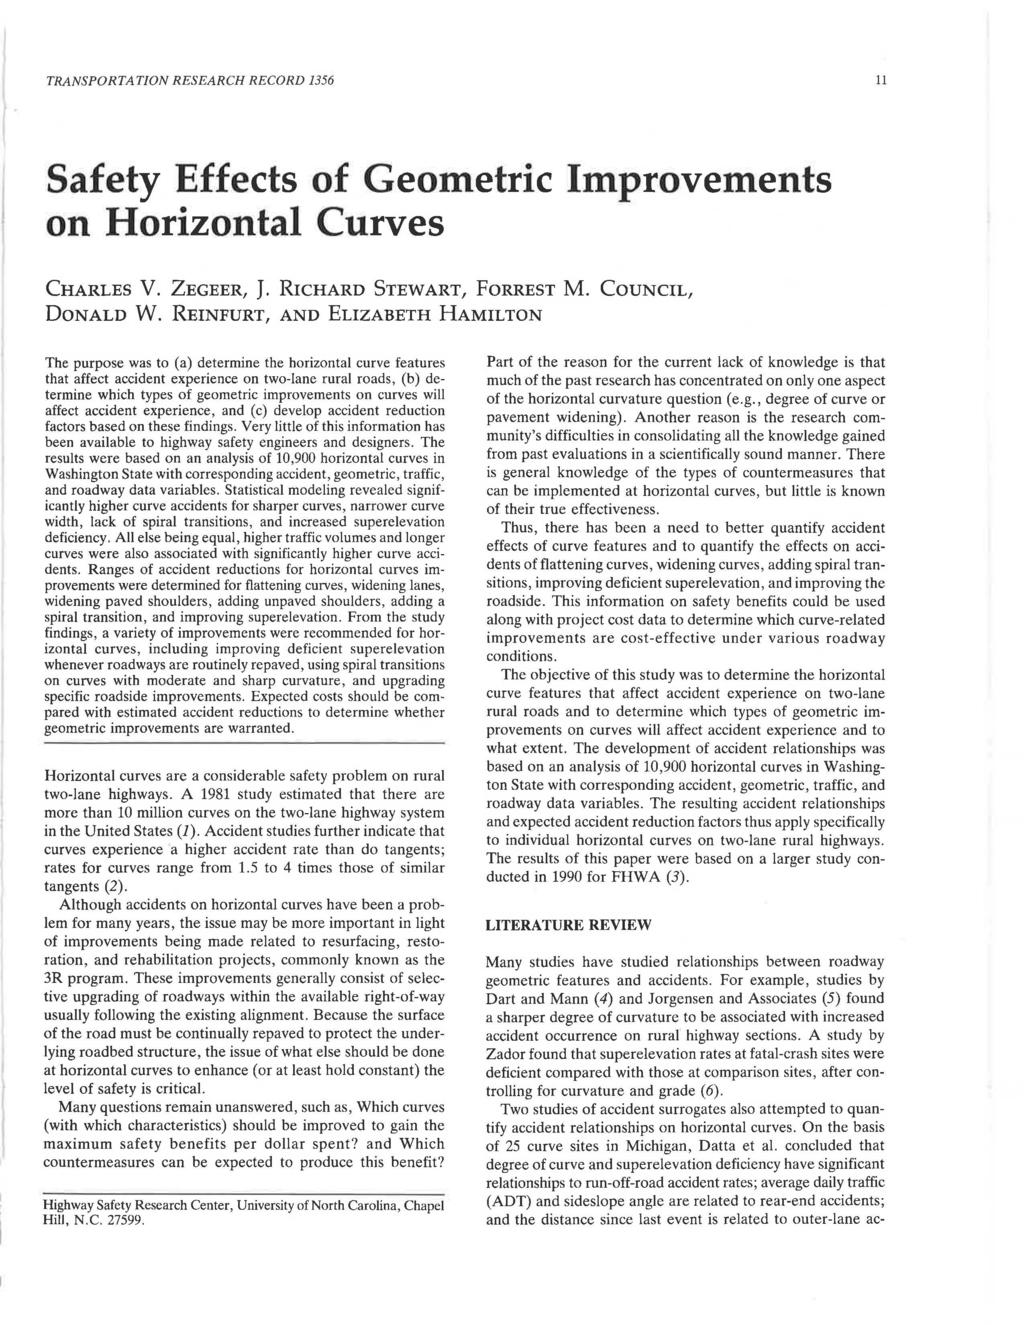 TRANSPORTATION RESEARCH RECORD 1356 11 Safety Effects of Geometric Improvements on Horizontal Curves CHARLES v. ZEGEER, J. RICHARD STEWART, FORREST M. COUNCIL, DONALD W.